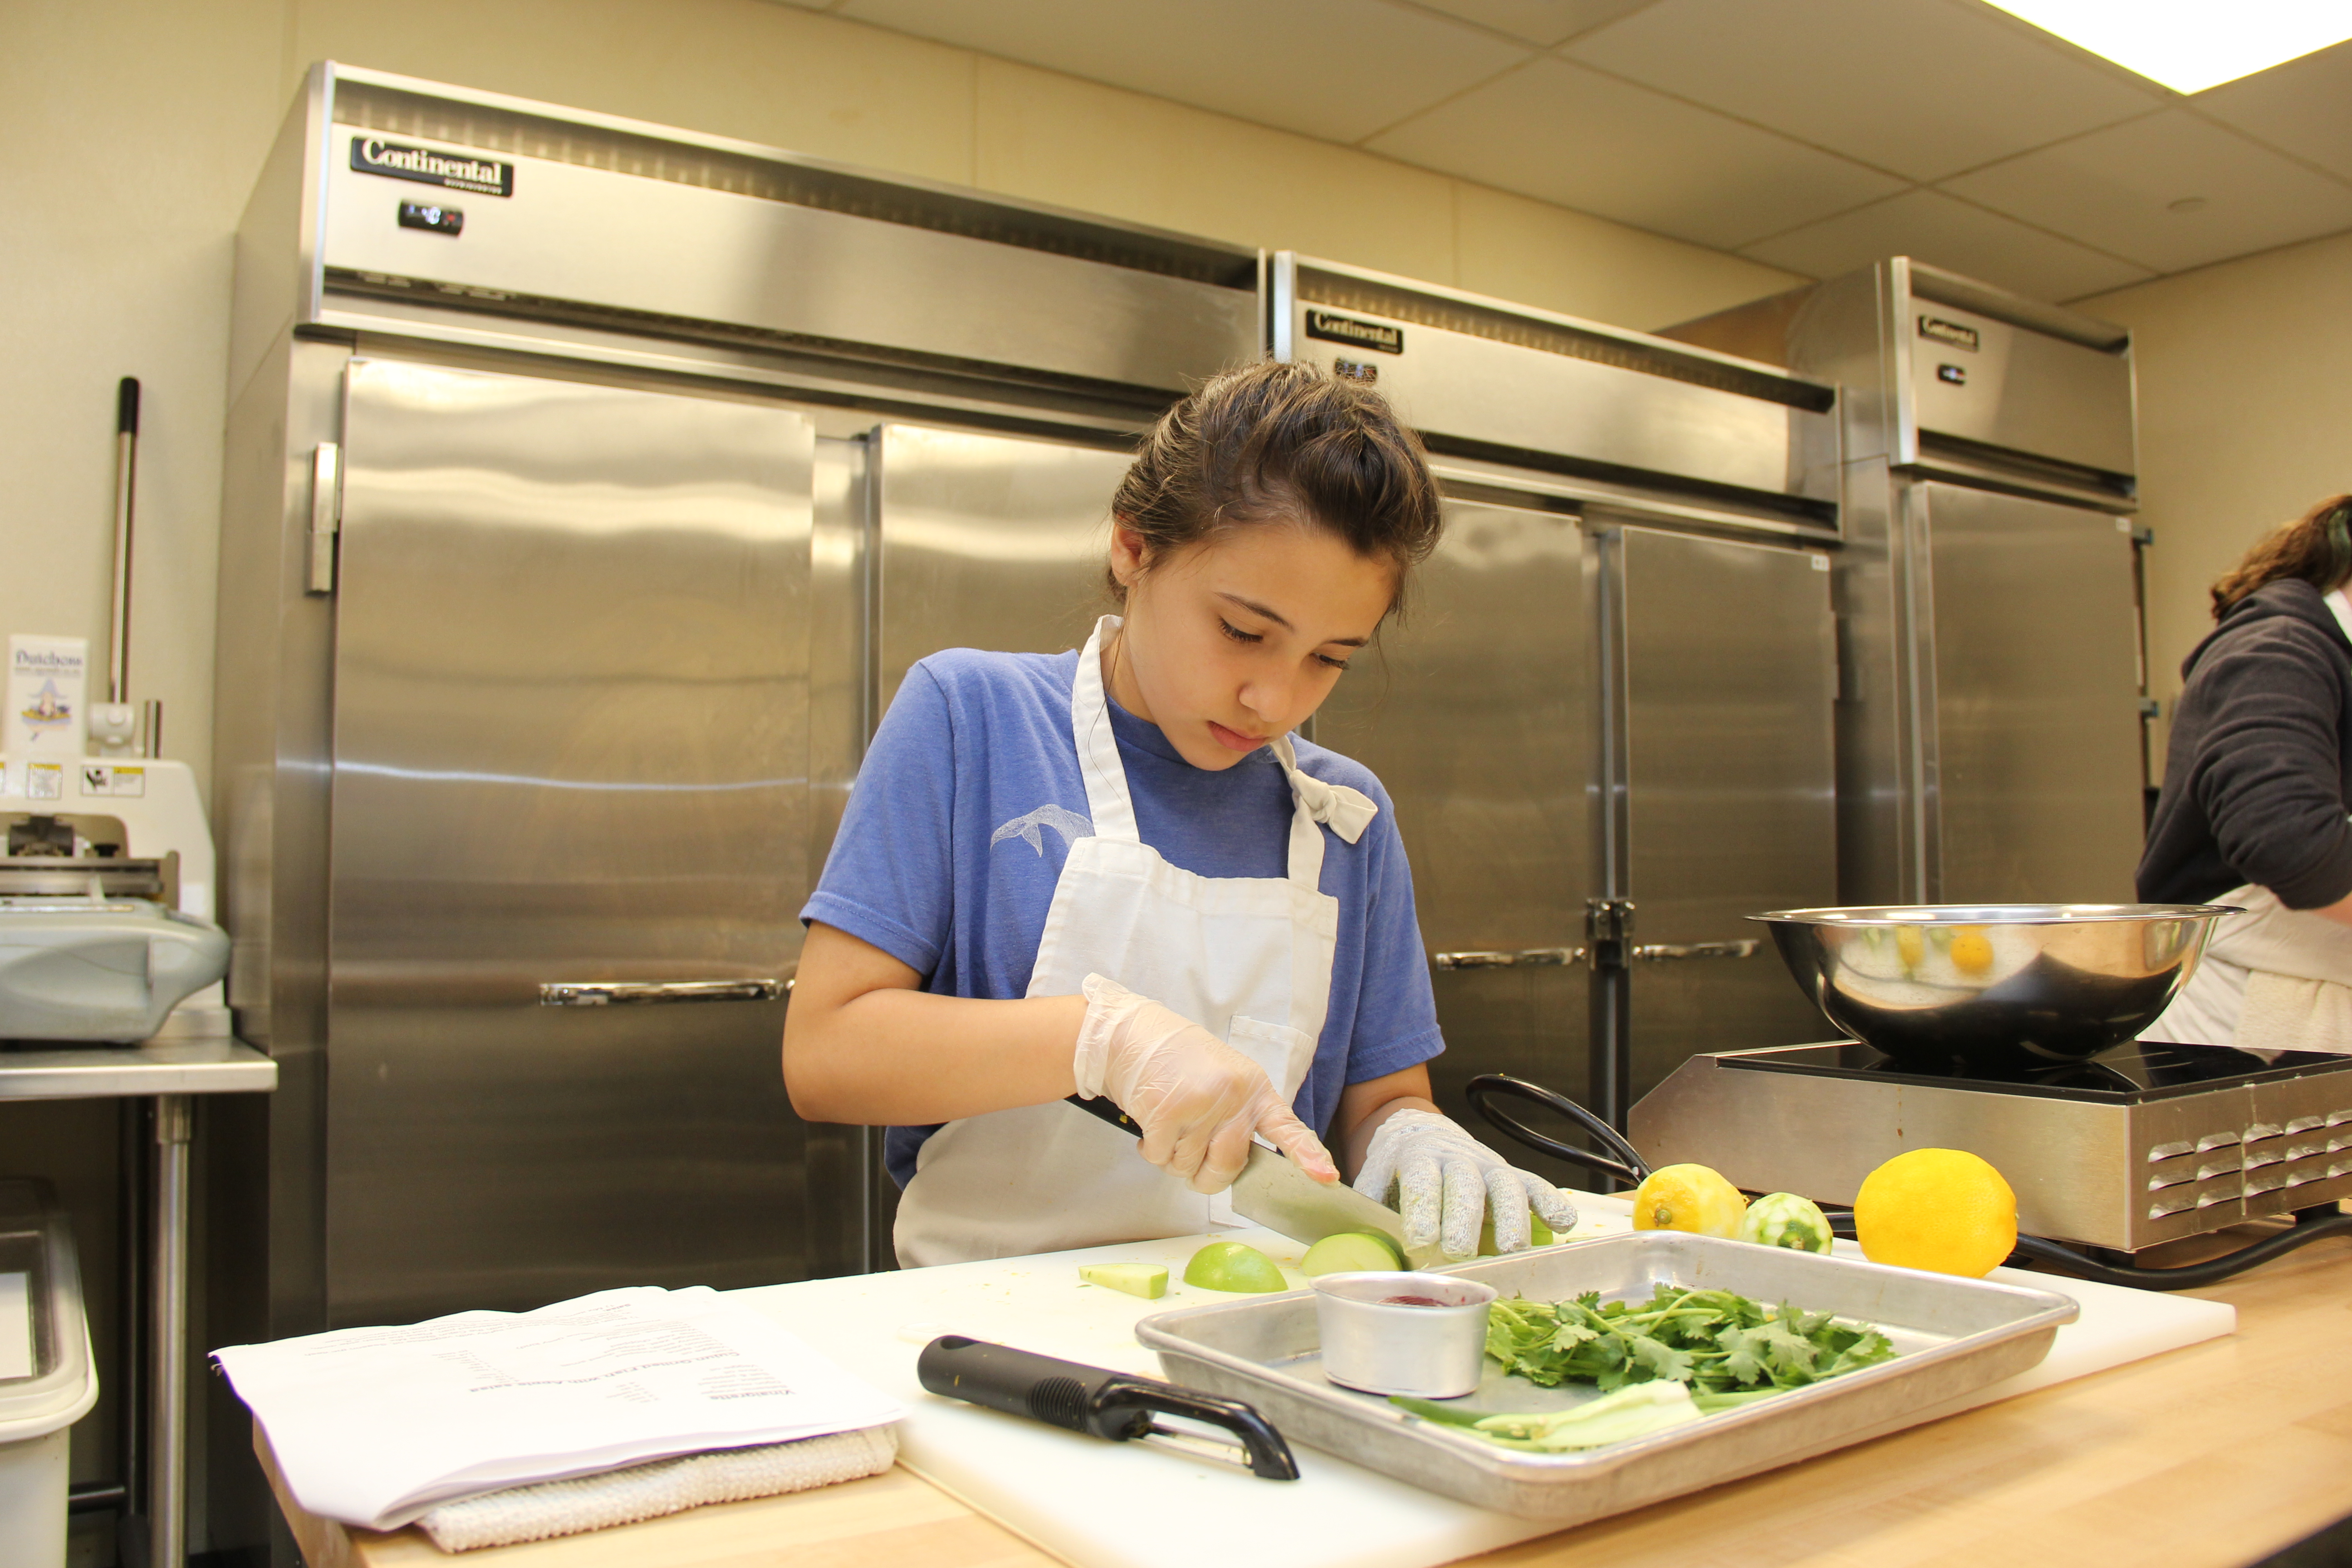 A student wearing an apron chops vegetables in a kitchen